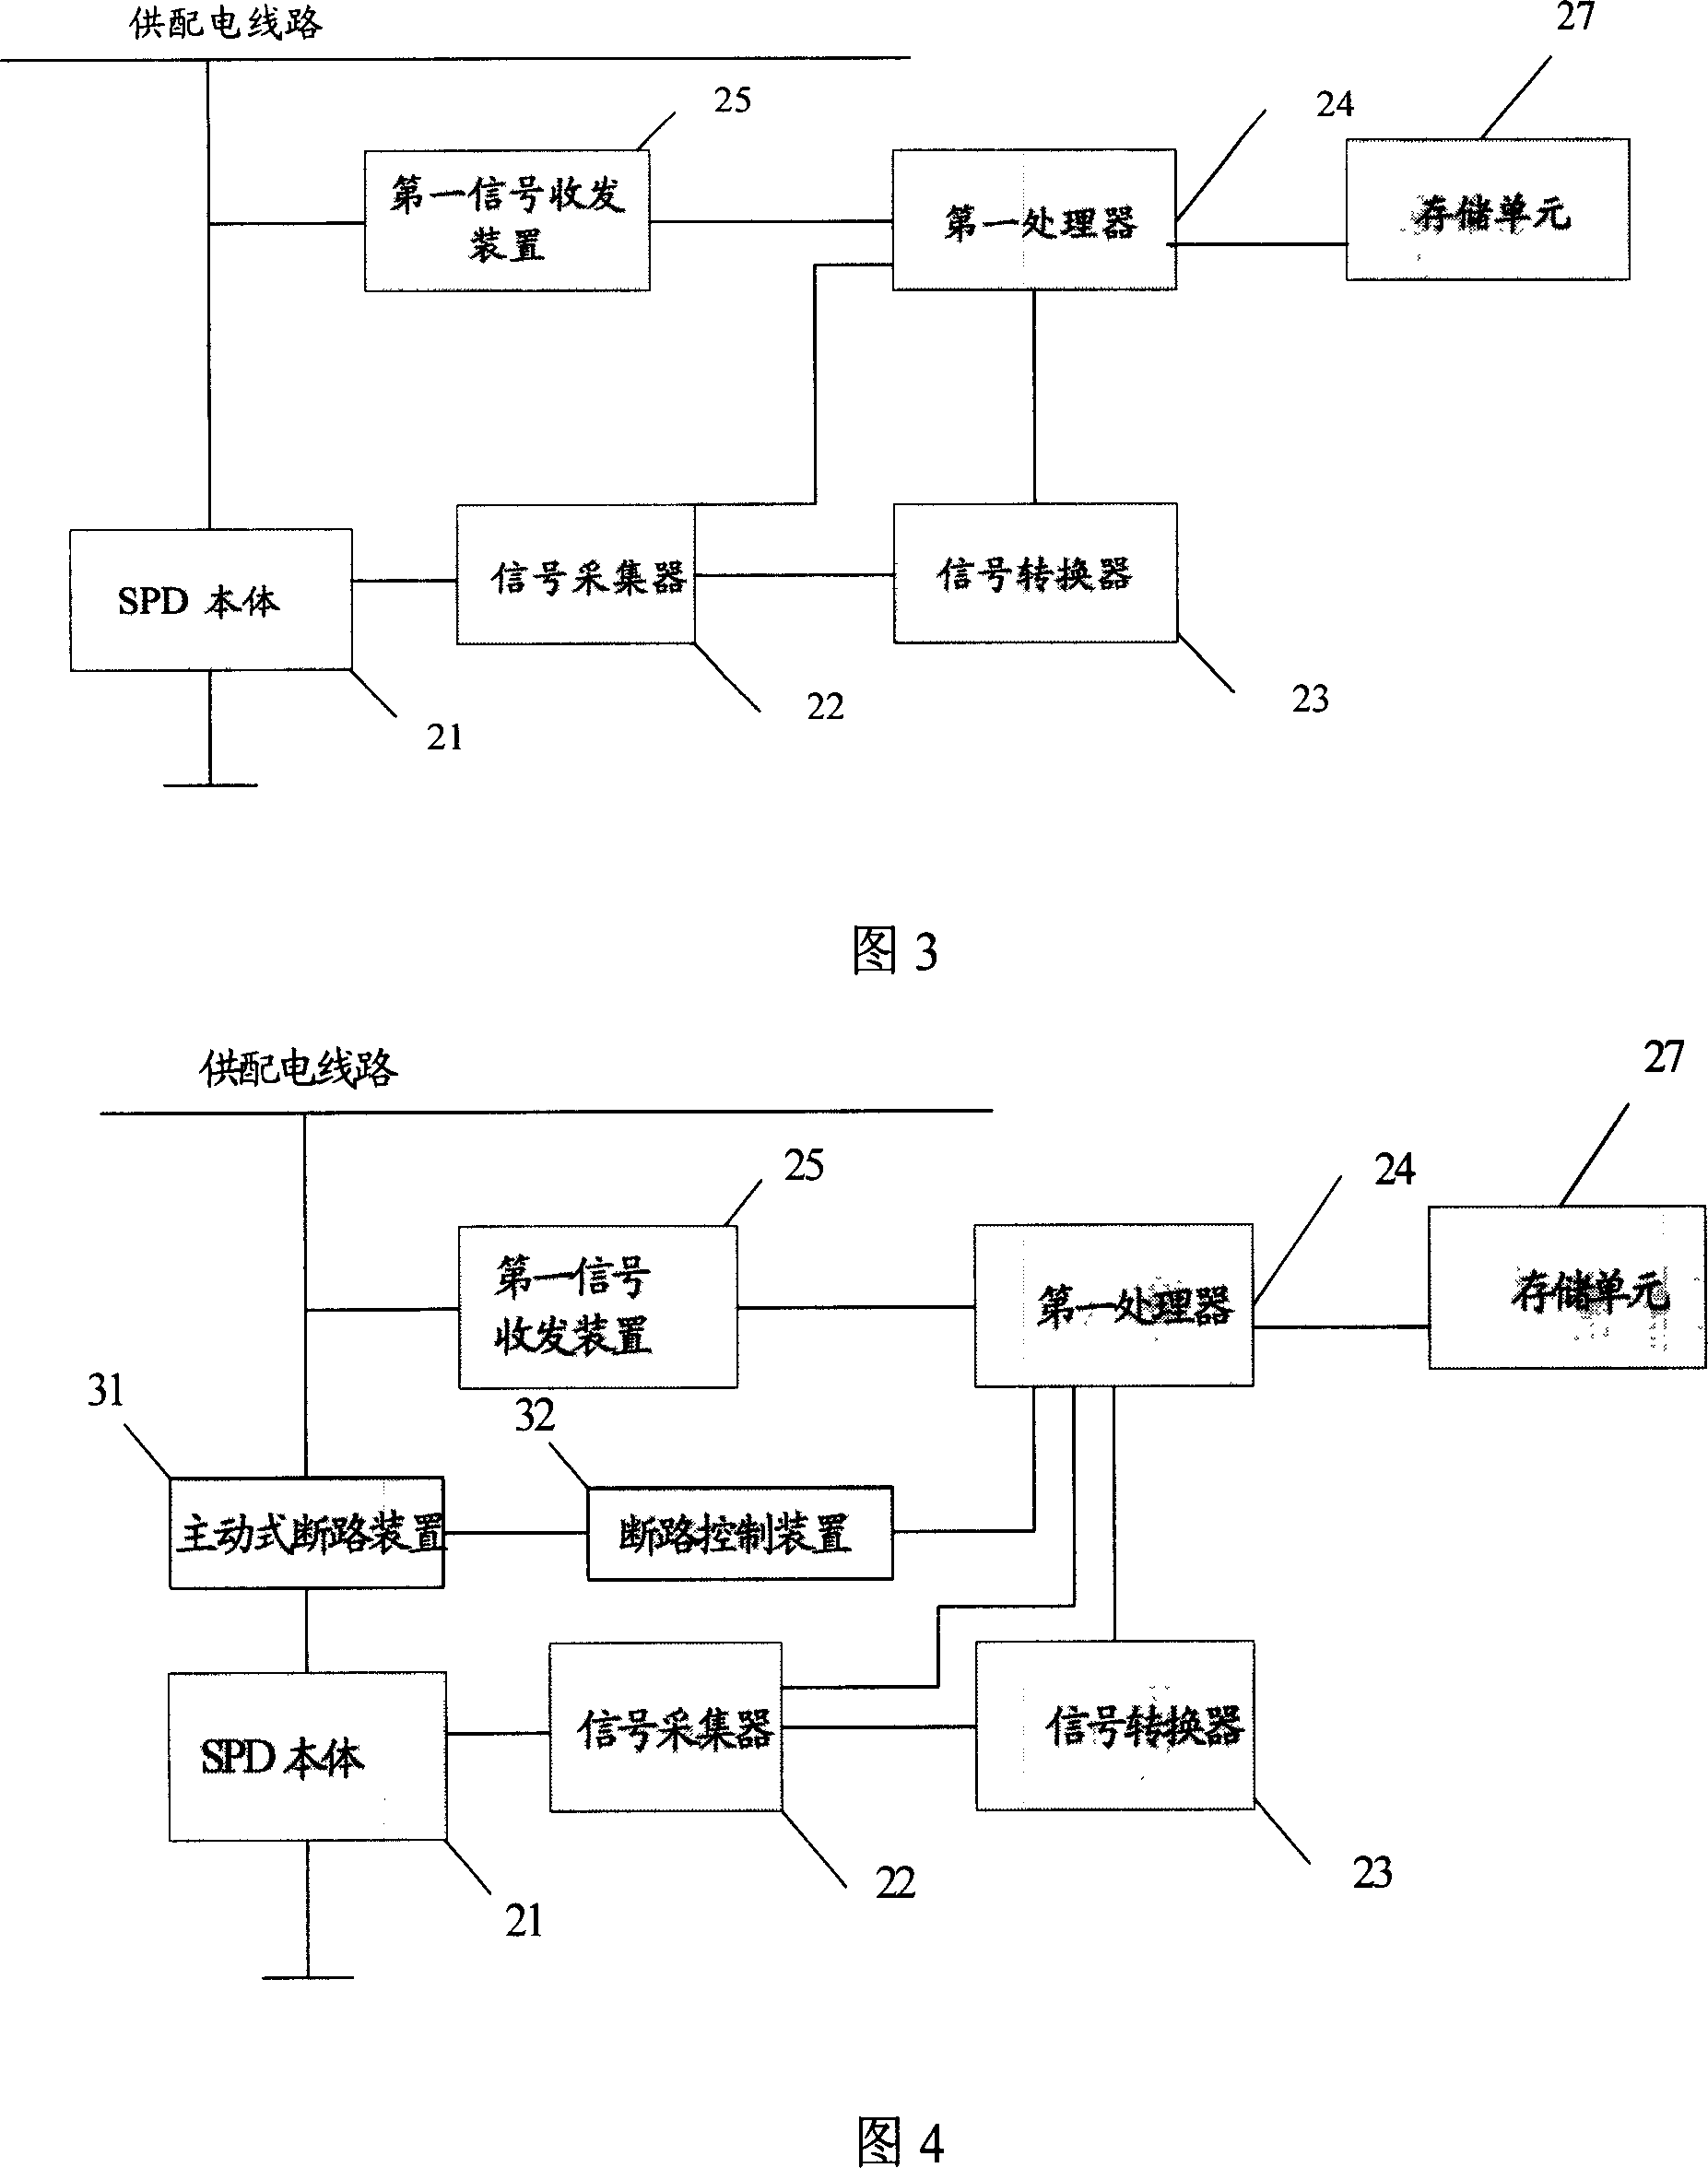 System for monitoring the surge protector based on distribution line and its method